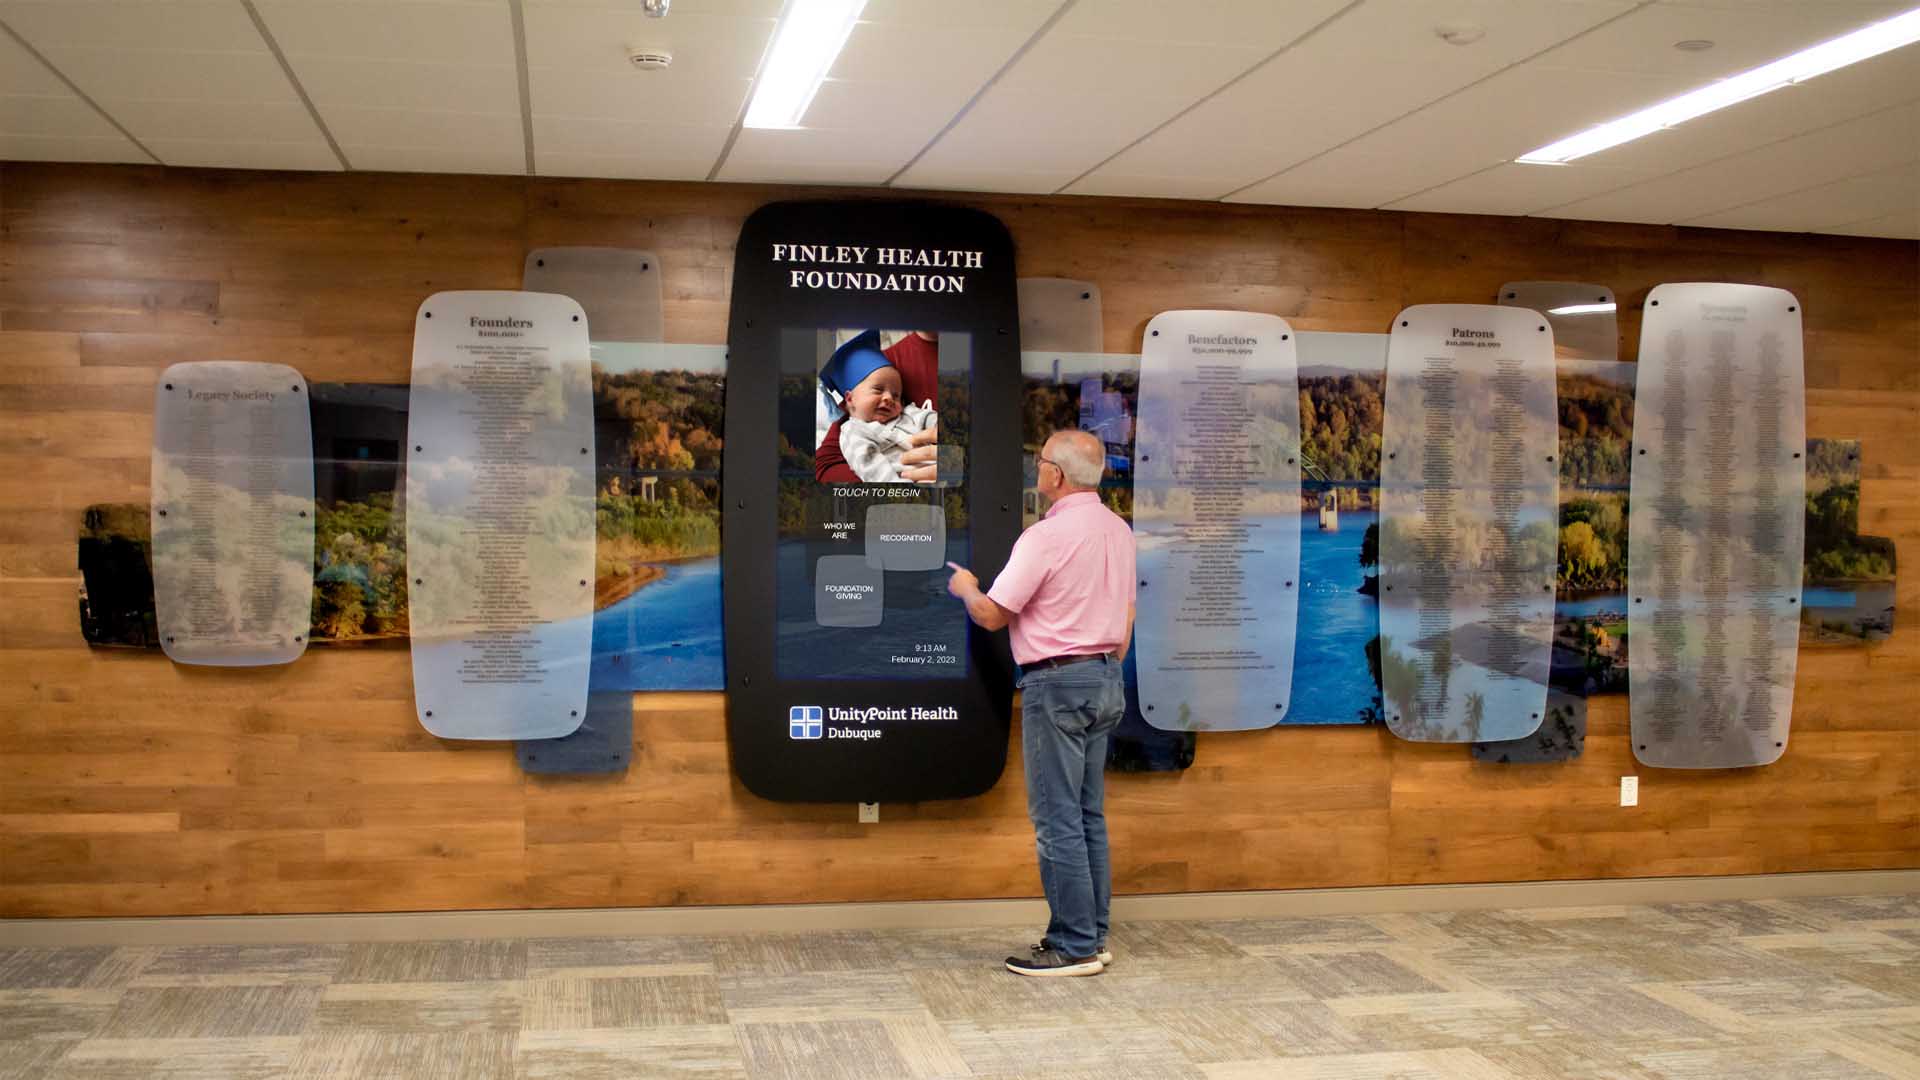 Interacting with the digital donor recognition display at a hospital